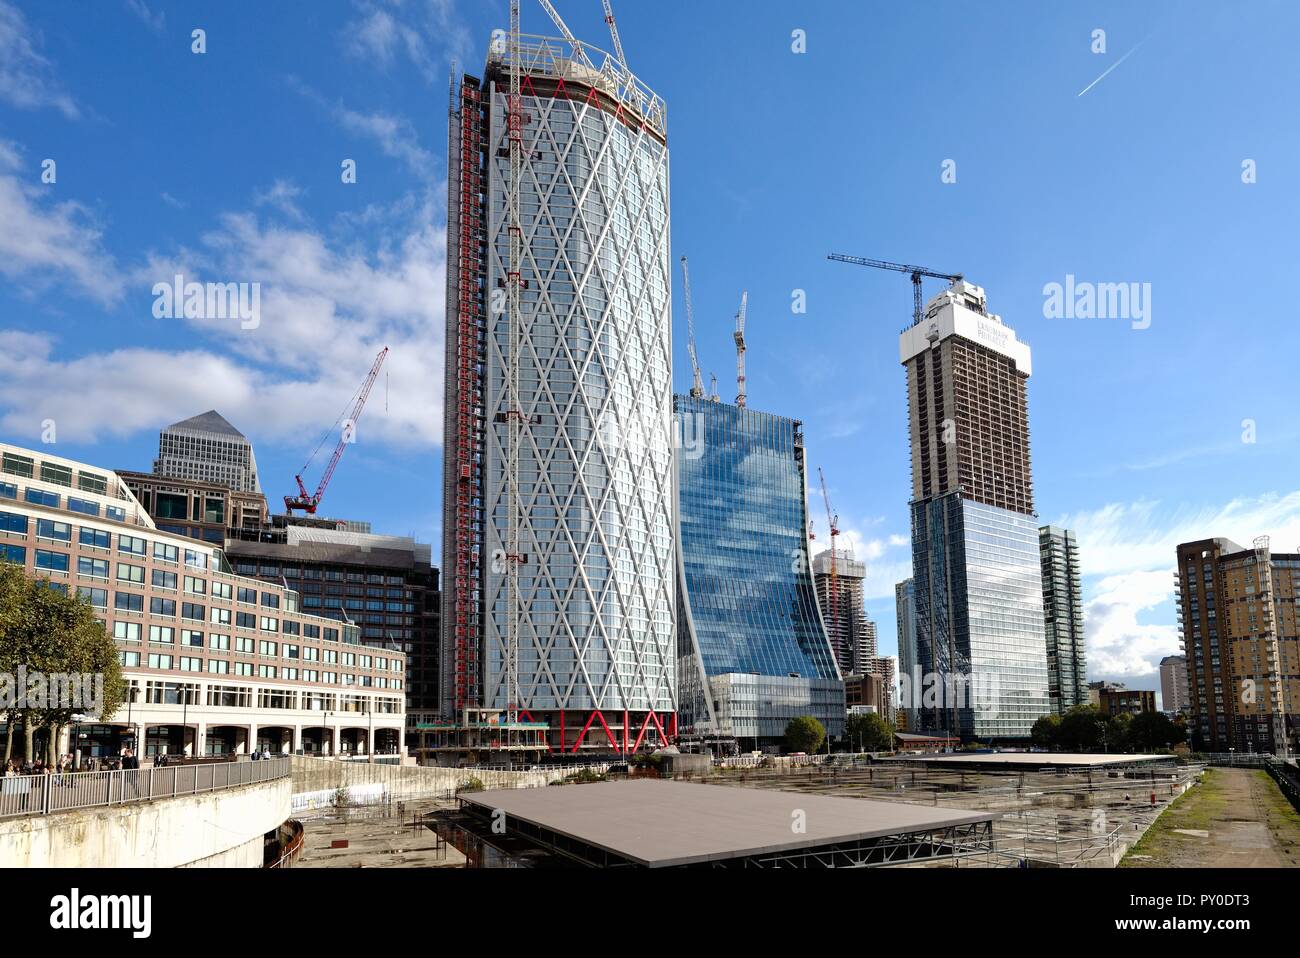 Construction of new office and residential towers at Canary Wharf Docklands London England UK Stock Photo